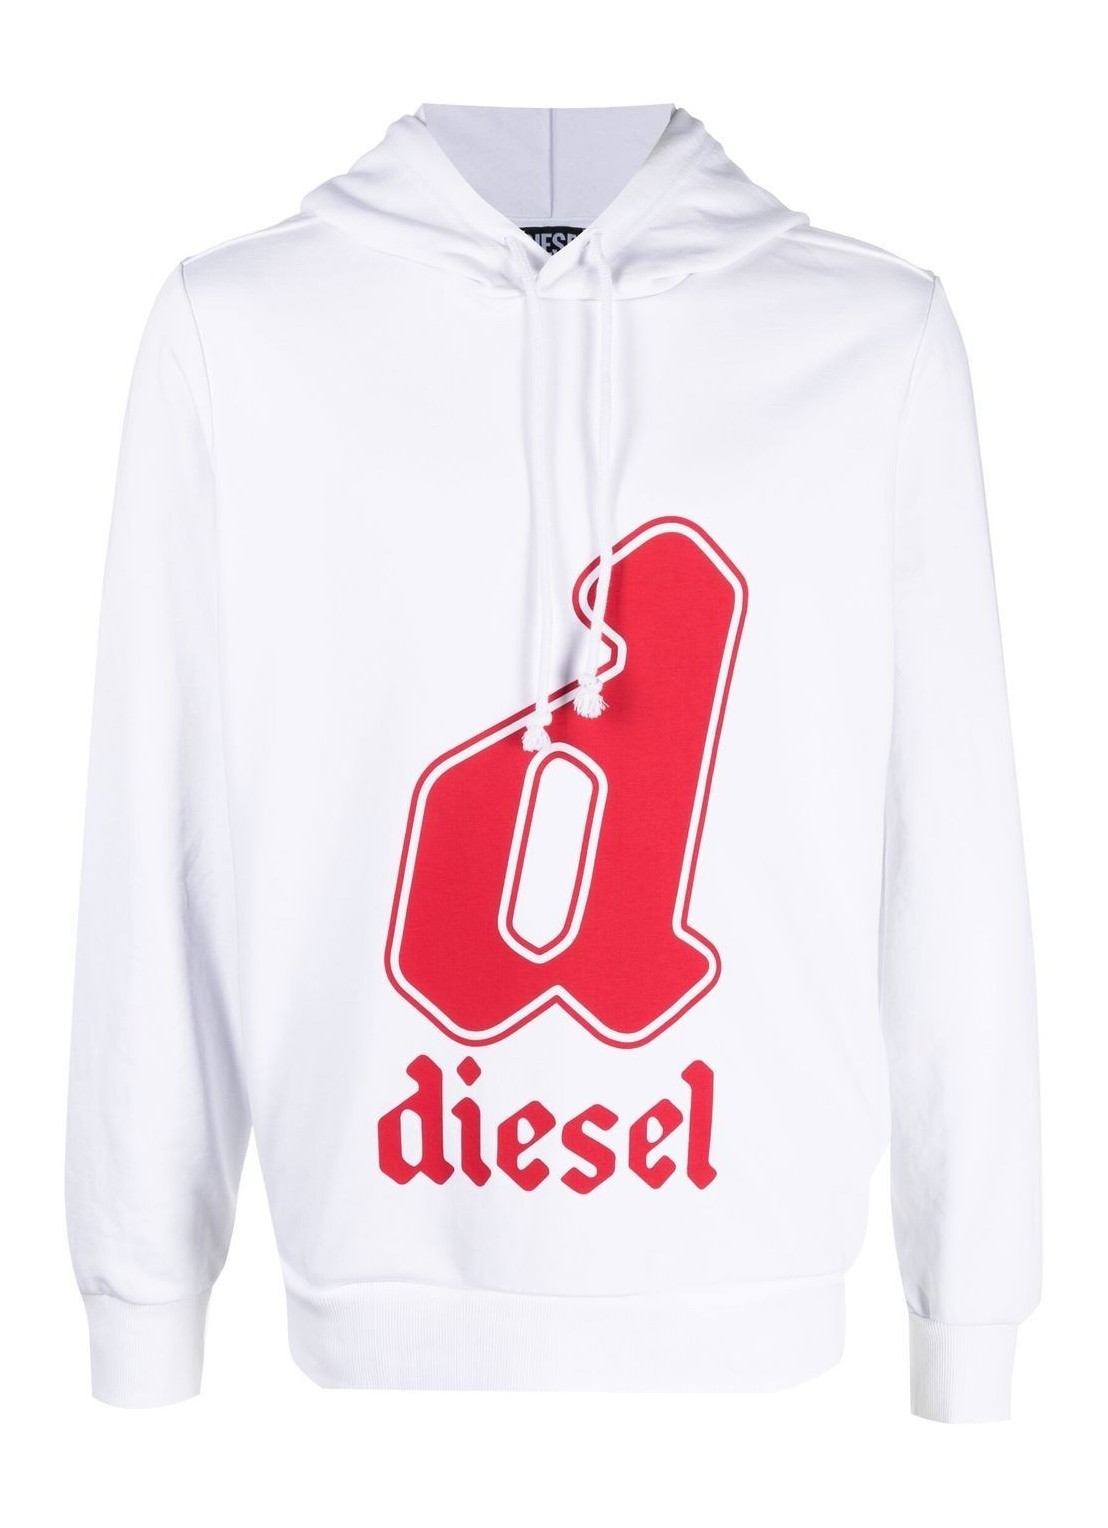 diesel sweater man s-ginnout a086900hayt 100 Talla S Color blanco